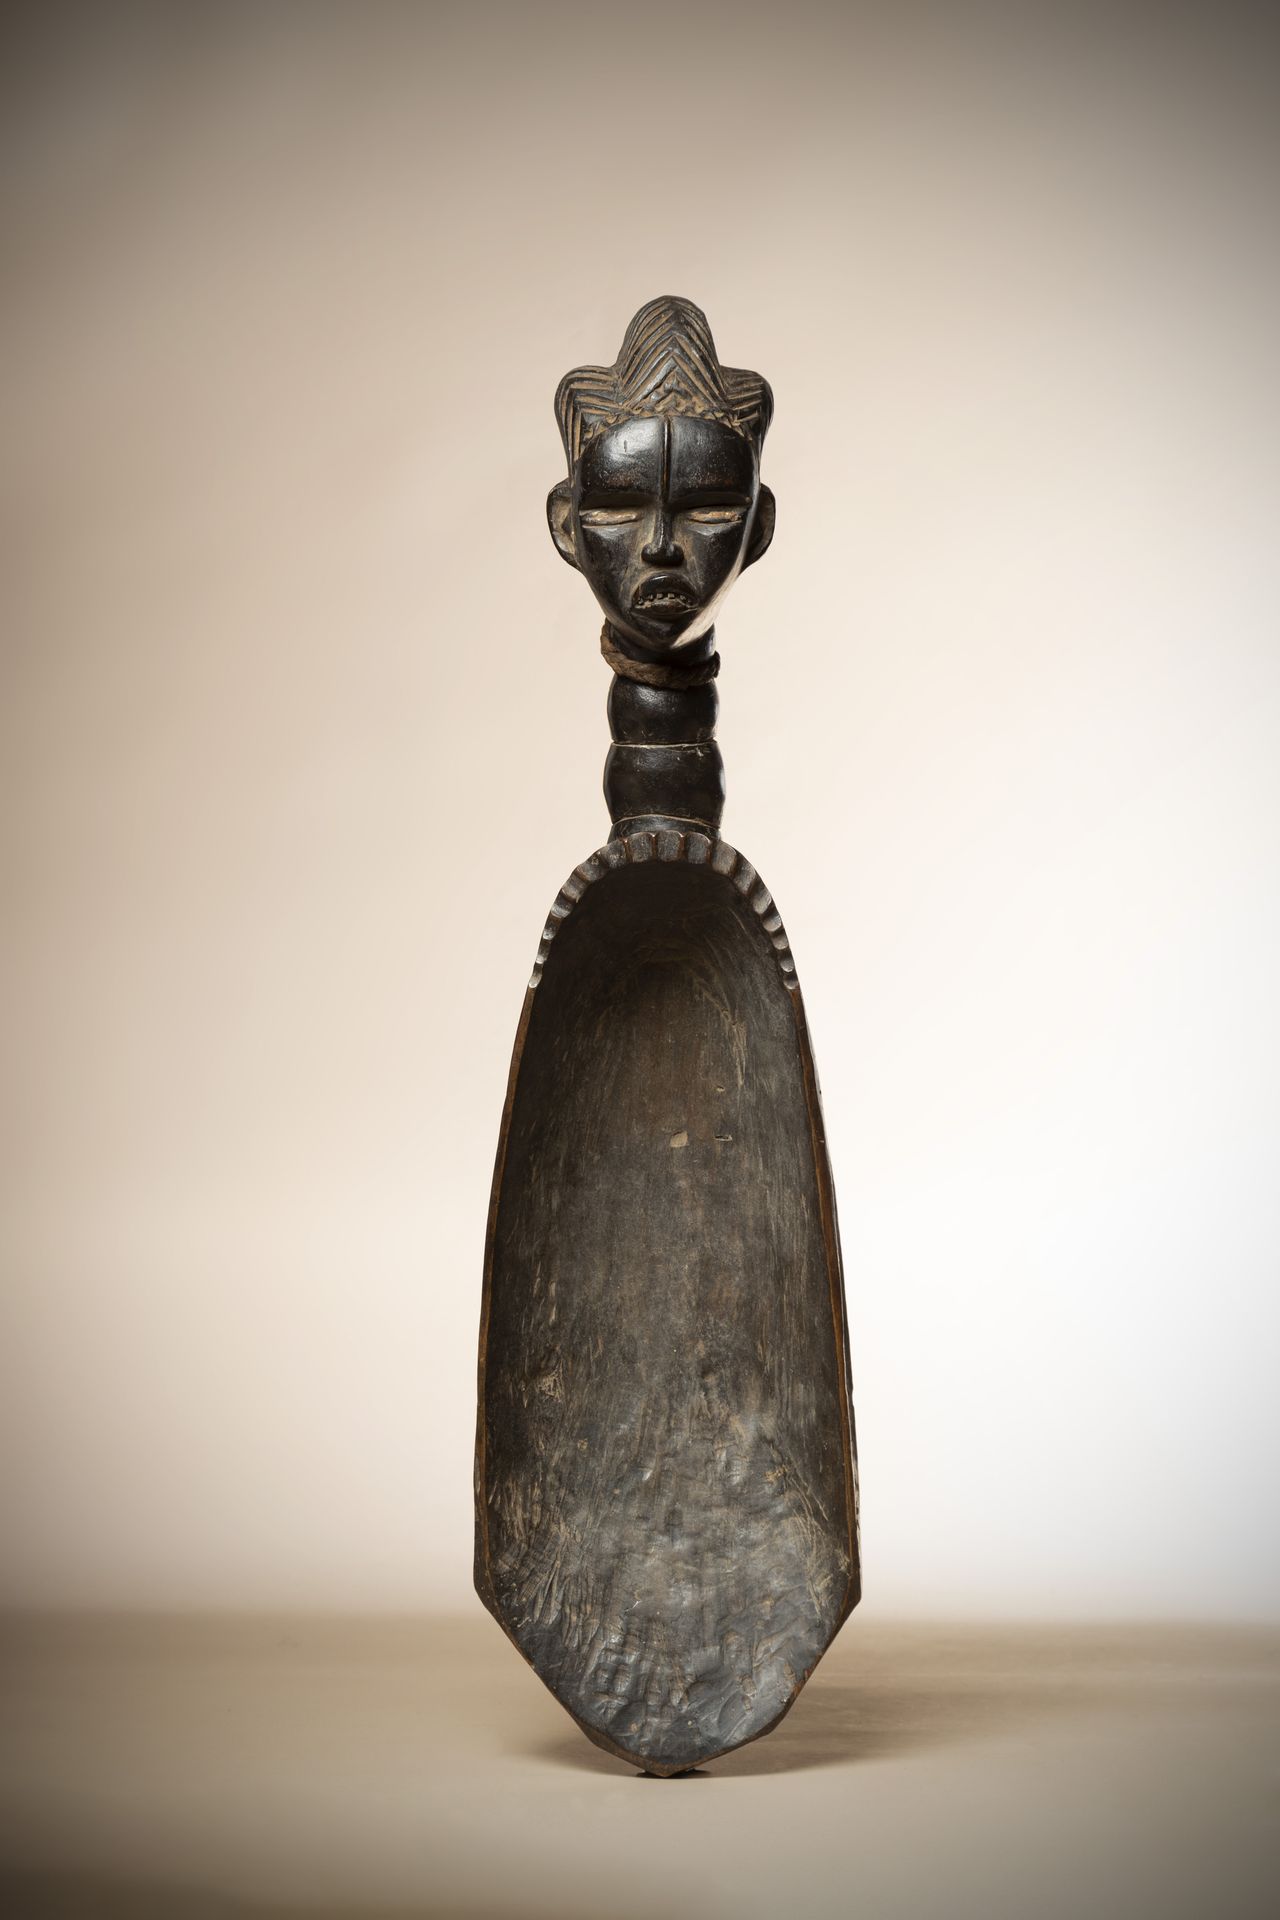 Null DAN (Ivory Coast)

Ceremonial rice shovel decorated with a beautiful female&hellip;